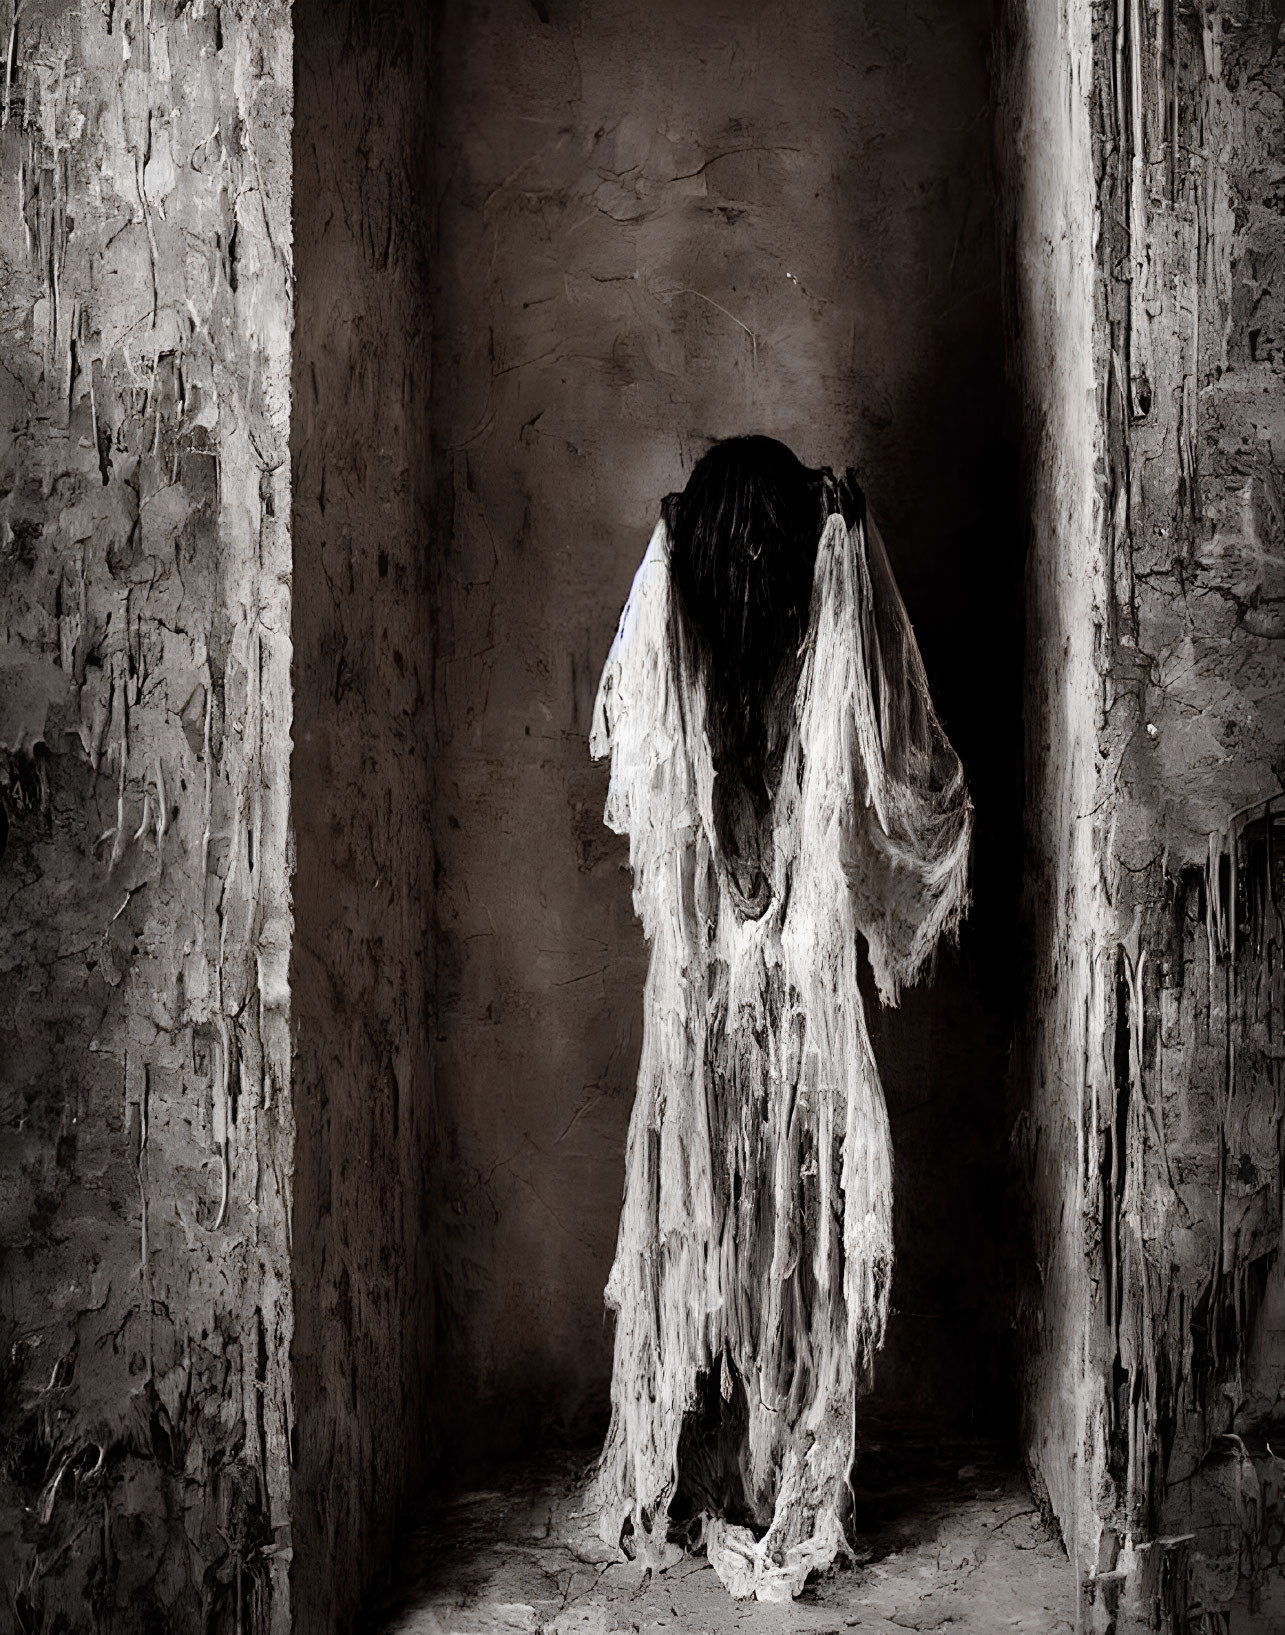 Eerie figure in tattered white cloth in dilapidated room